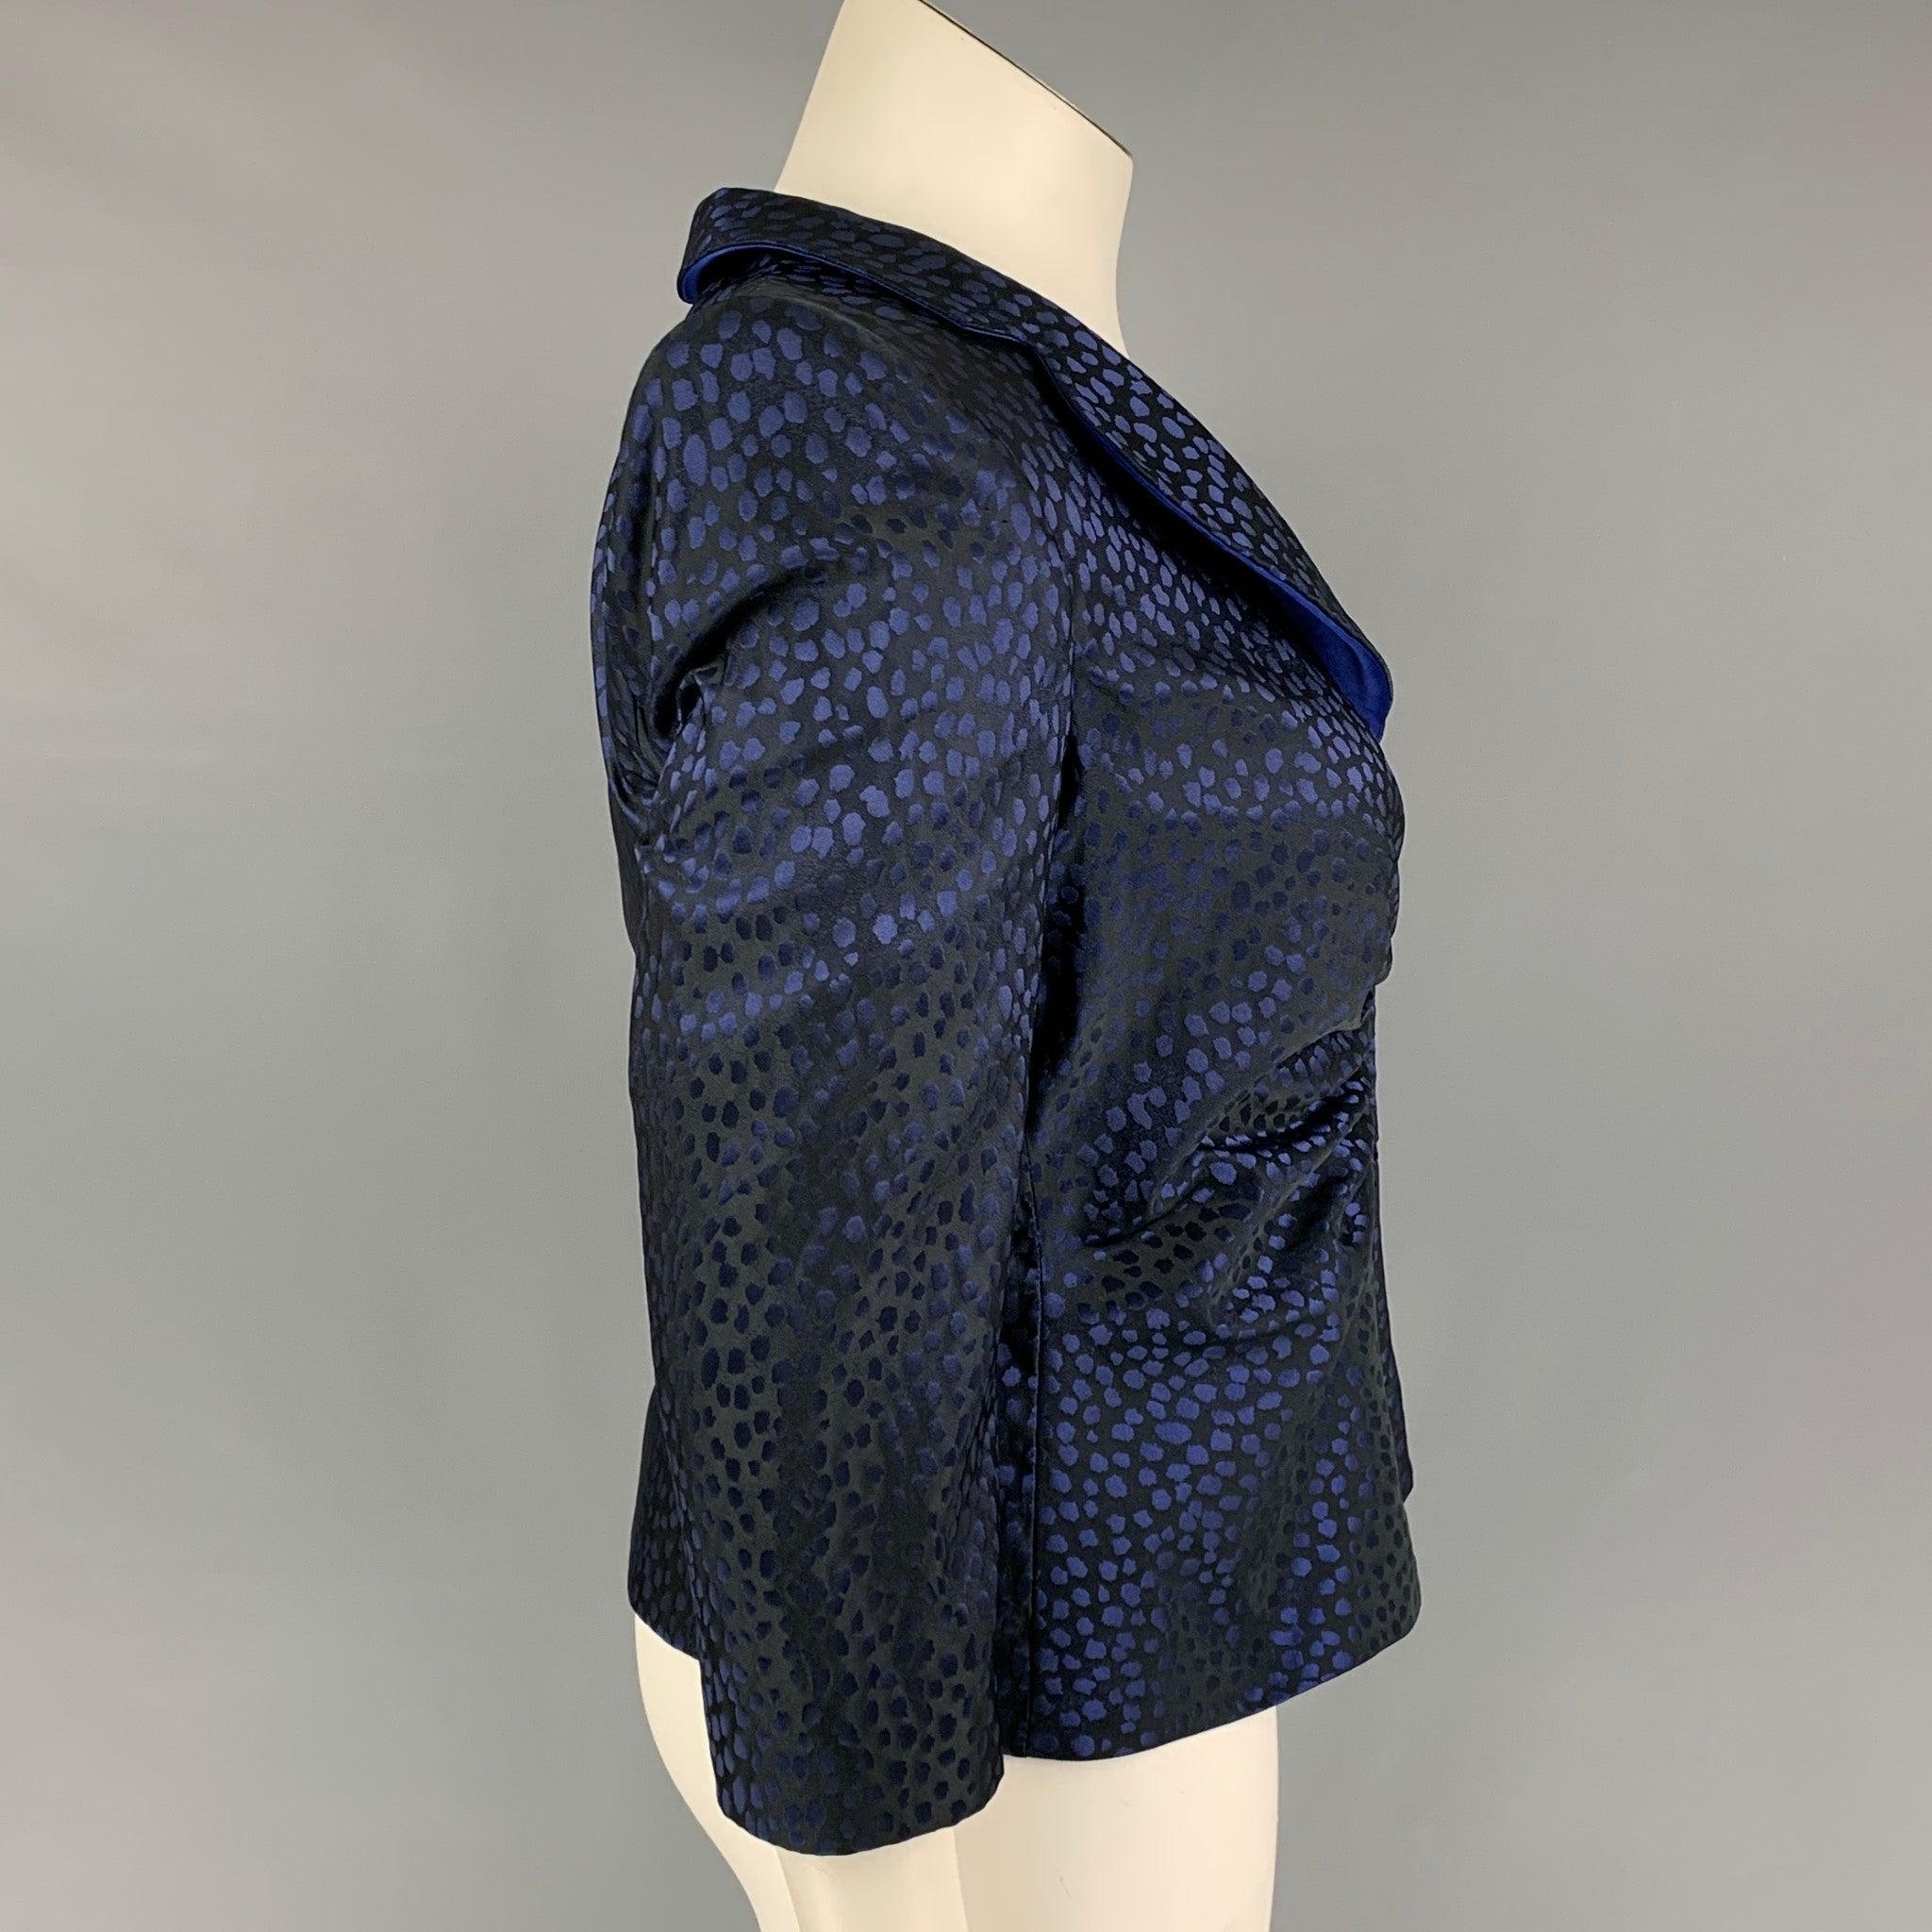 ARMANI COLLEZIONI blazer comes in a black & blue print polyester featurnig a front ruched design, notch lapel, and a zip up closure. Made in Italy.
Very Good
Pre-Owned Condition. 

Marked:   12 

Measurements: 
 
Shoulder: 16 inches  Bust: 36 inches